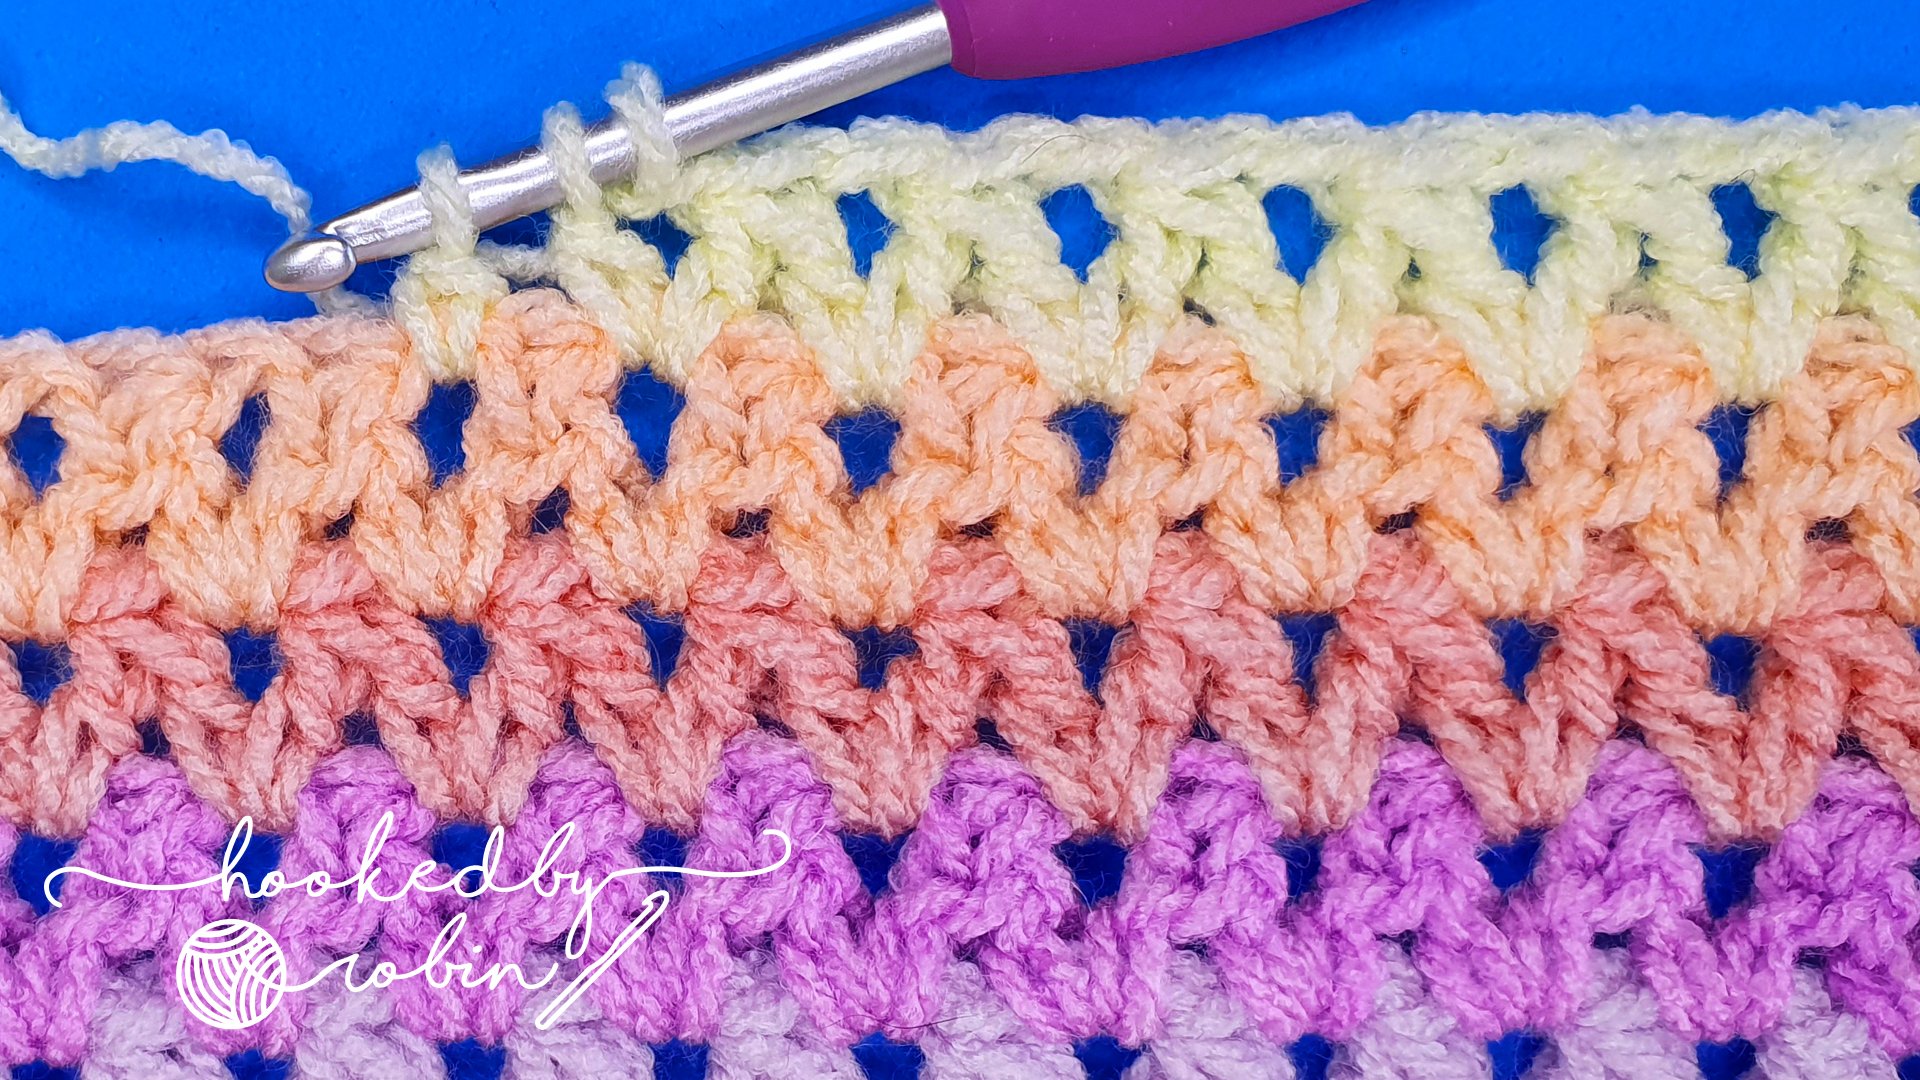 How To Crochet With Fuzzy Yarn - An Unconventional No Fail